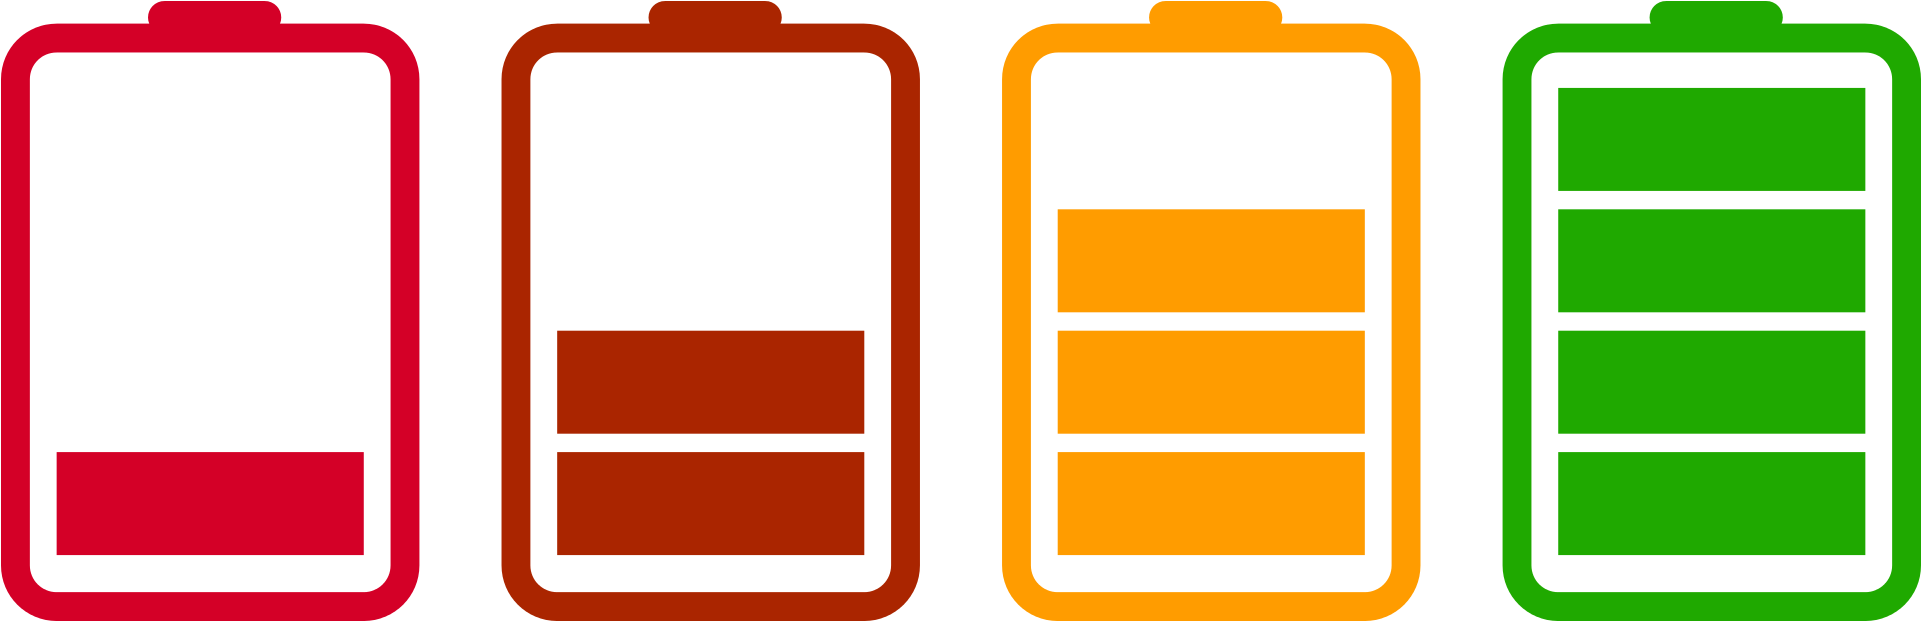 Battery Stages Charging Free Transparent Image HQ PNG Image